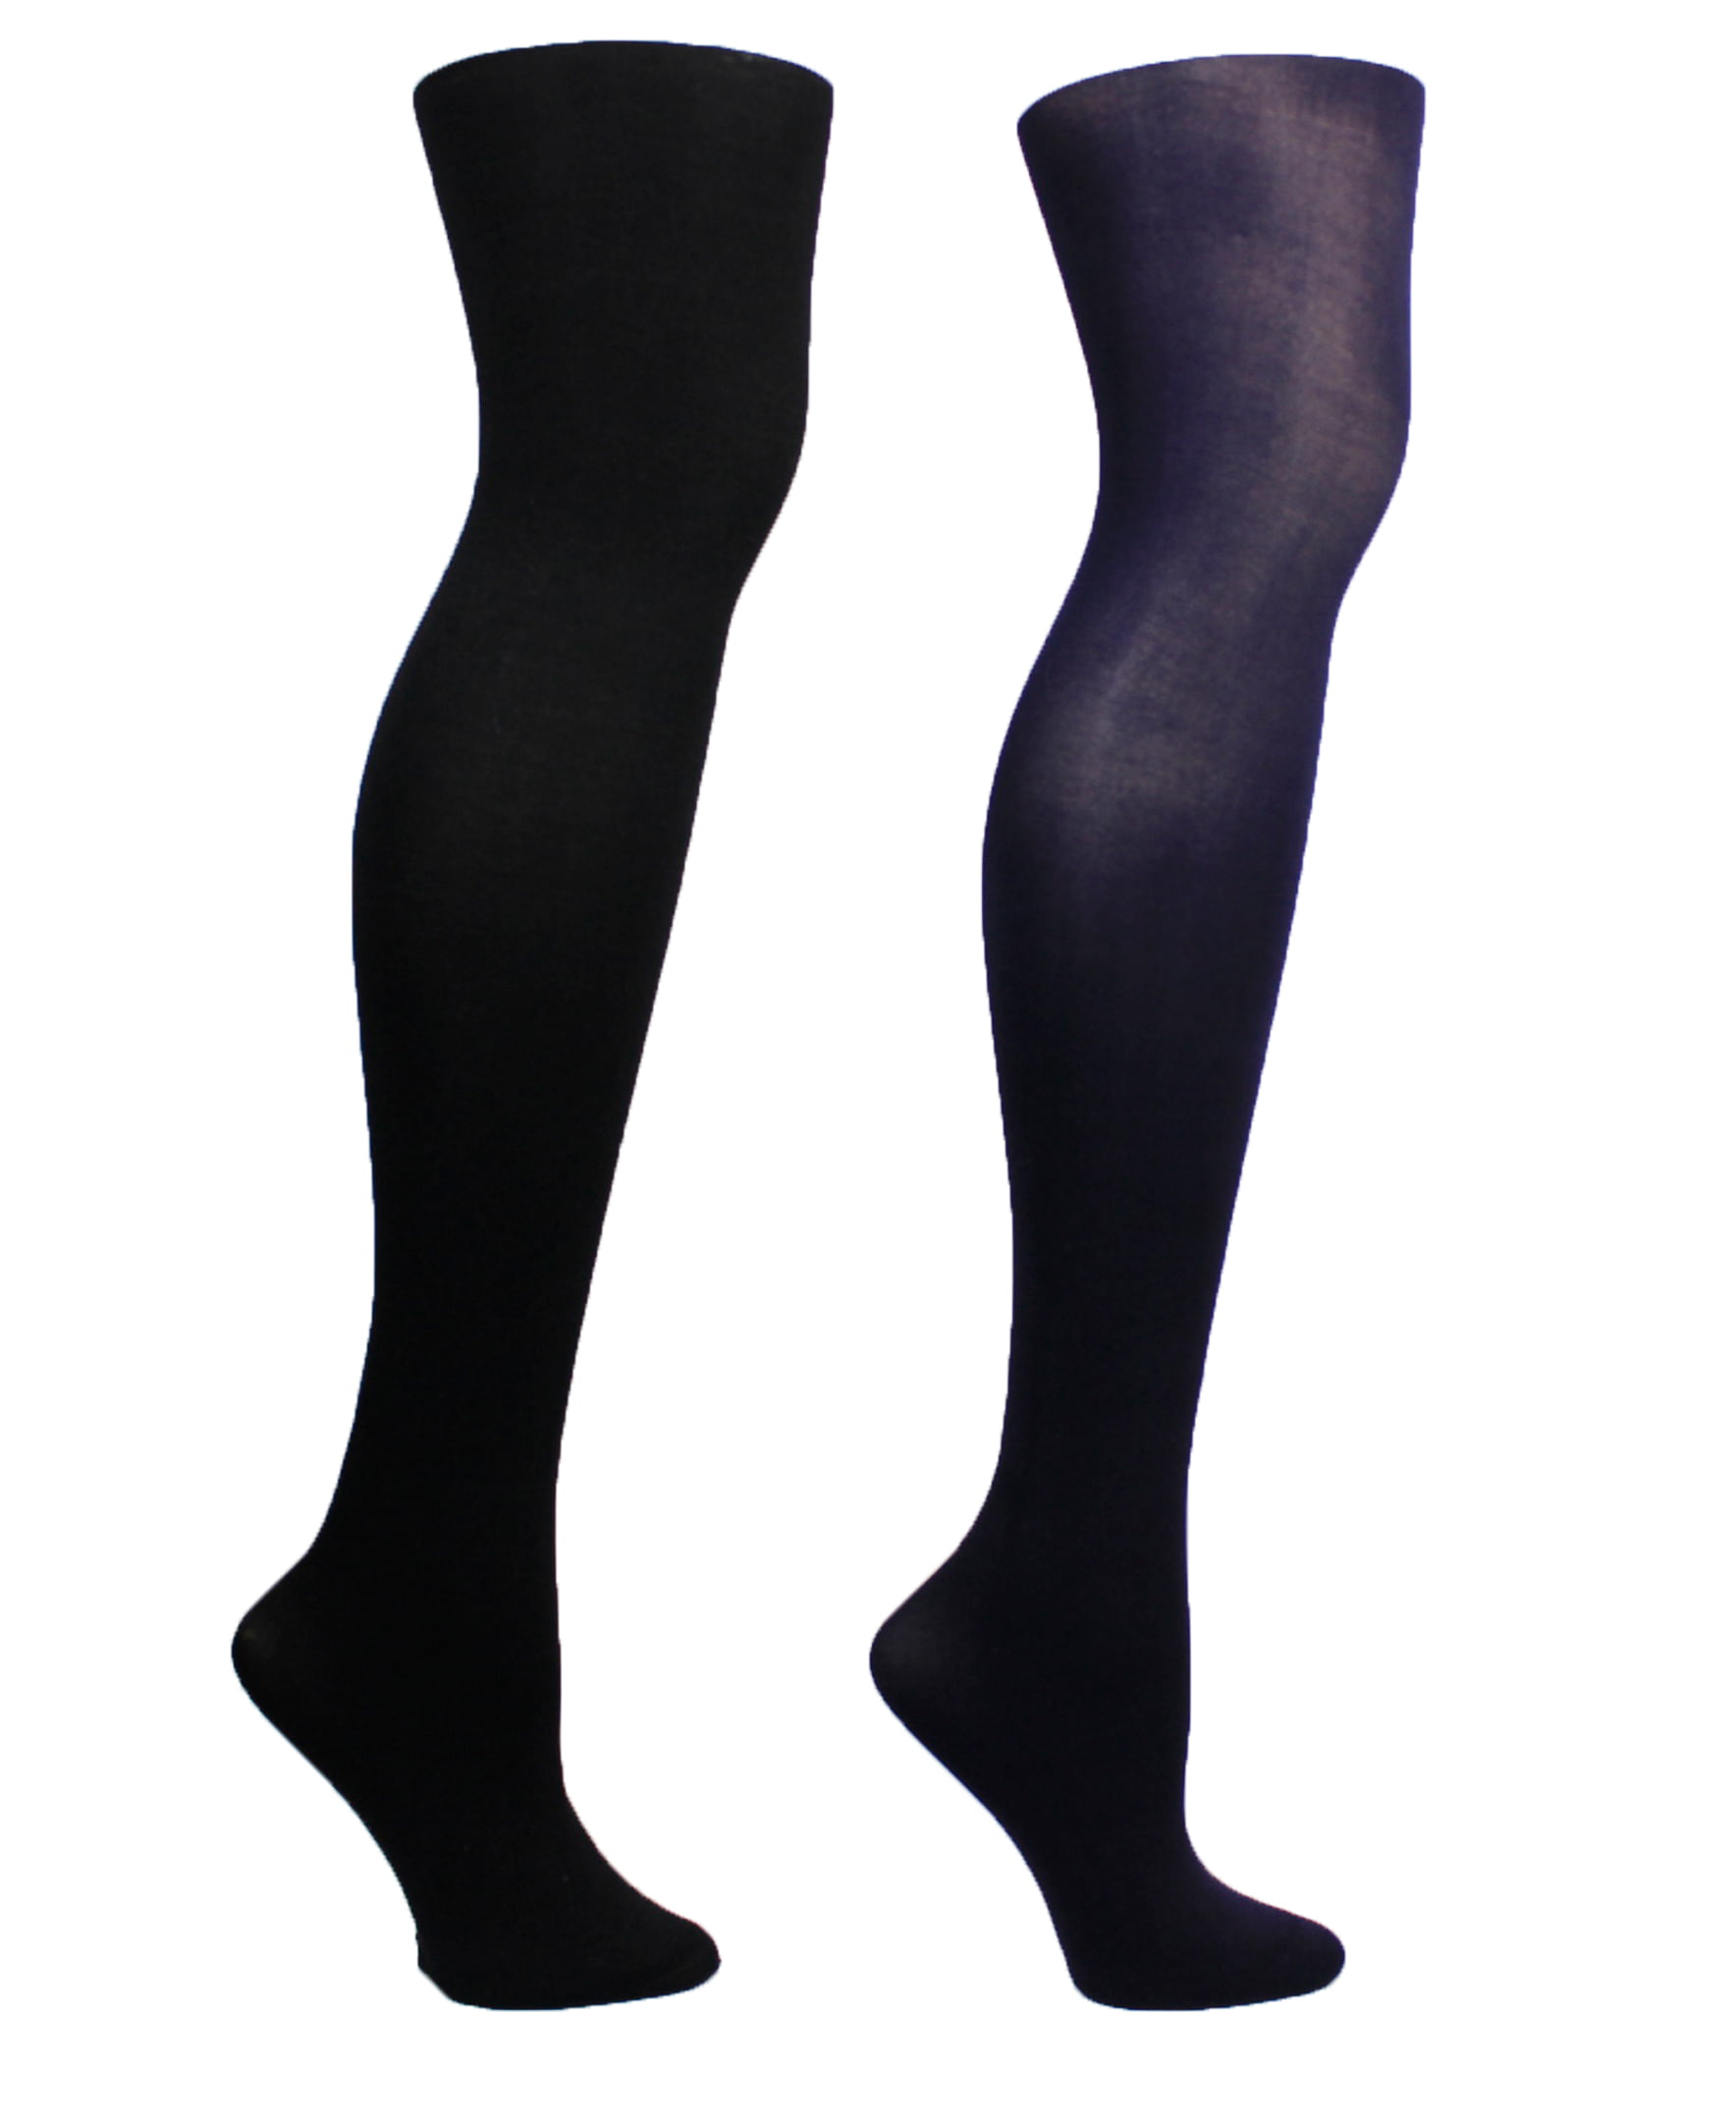 On The Go Women's Opaque Control Top Black Footed Tights, 2 Pack